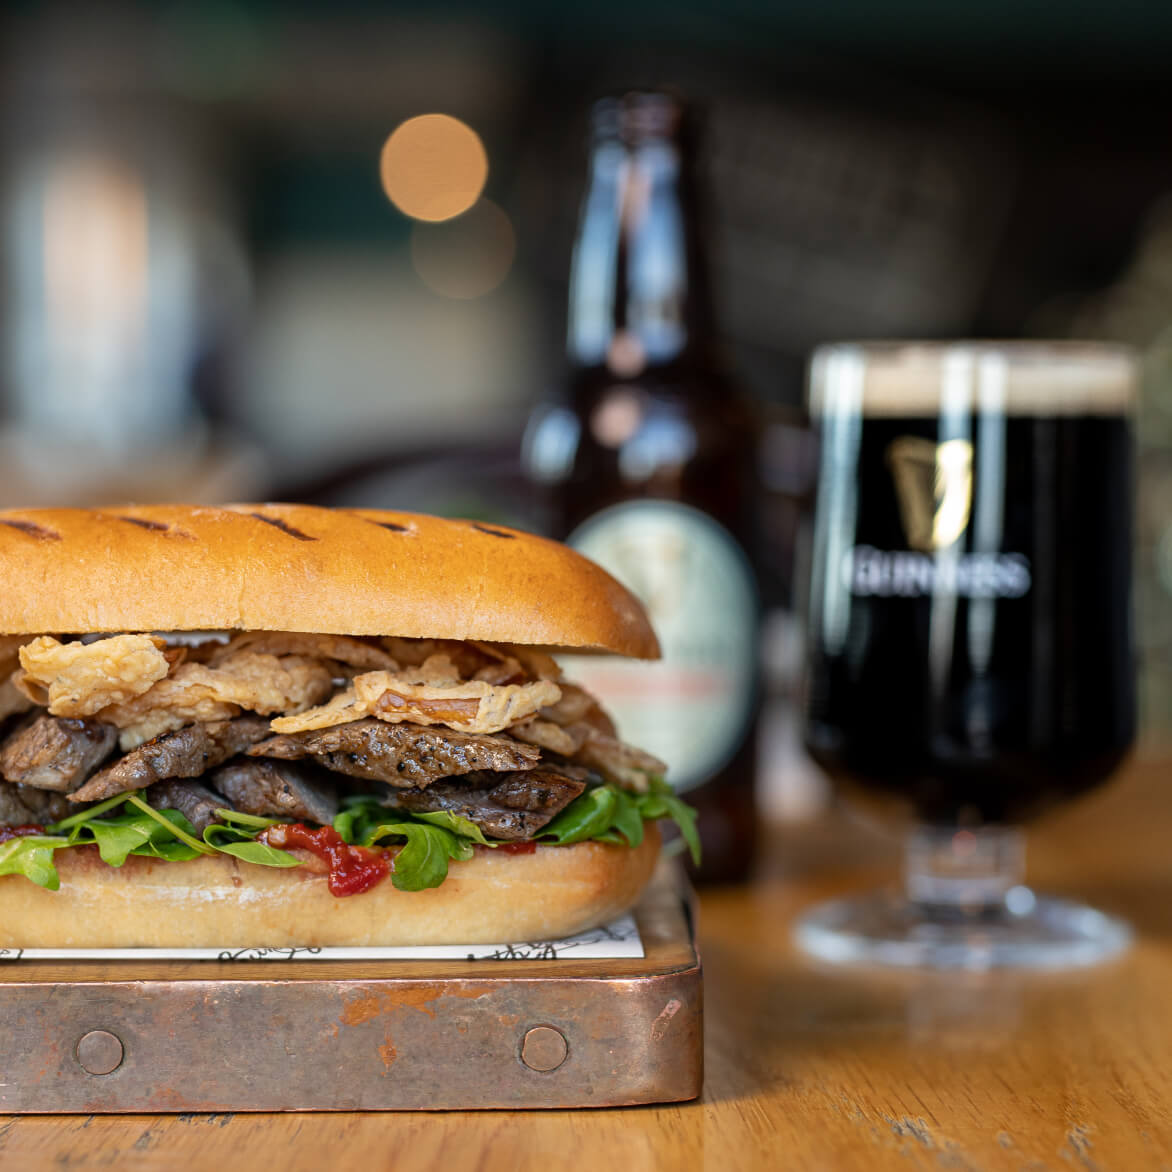 Arthur’s Bar steak sandwich made from prime Irish striploin, served on a brioche sub roll, with spicy Ballymaloe relish and crispy onions. Guinness Original Extra Stout can be seen behind the sandwich which is the recommended beer pairing. 